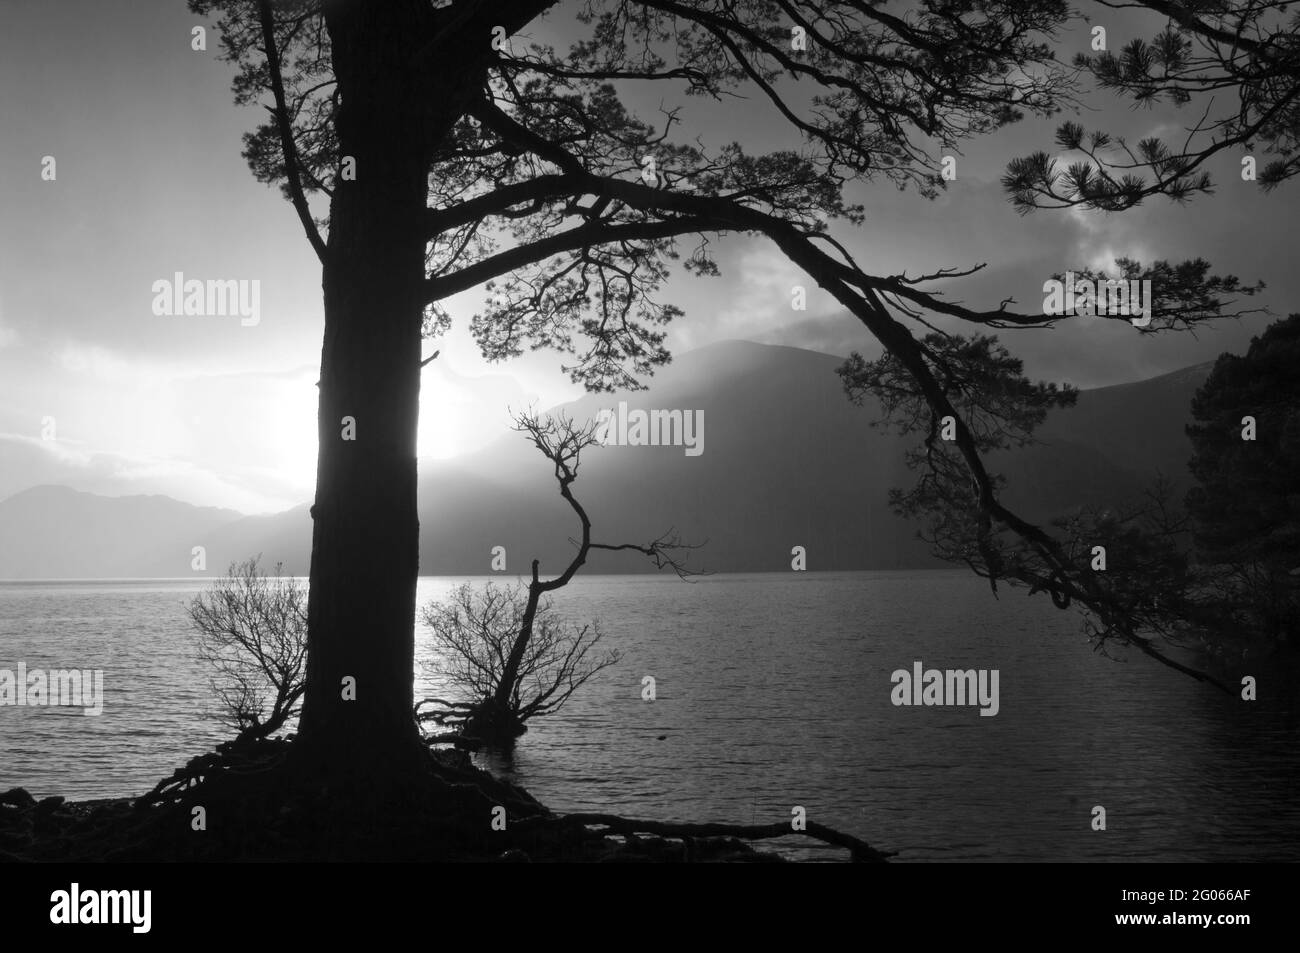 Black and white image of Lough Leane, County Kerry, Ireland - John Gollop Stock Photo